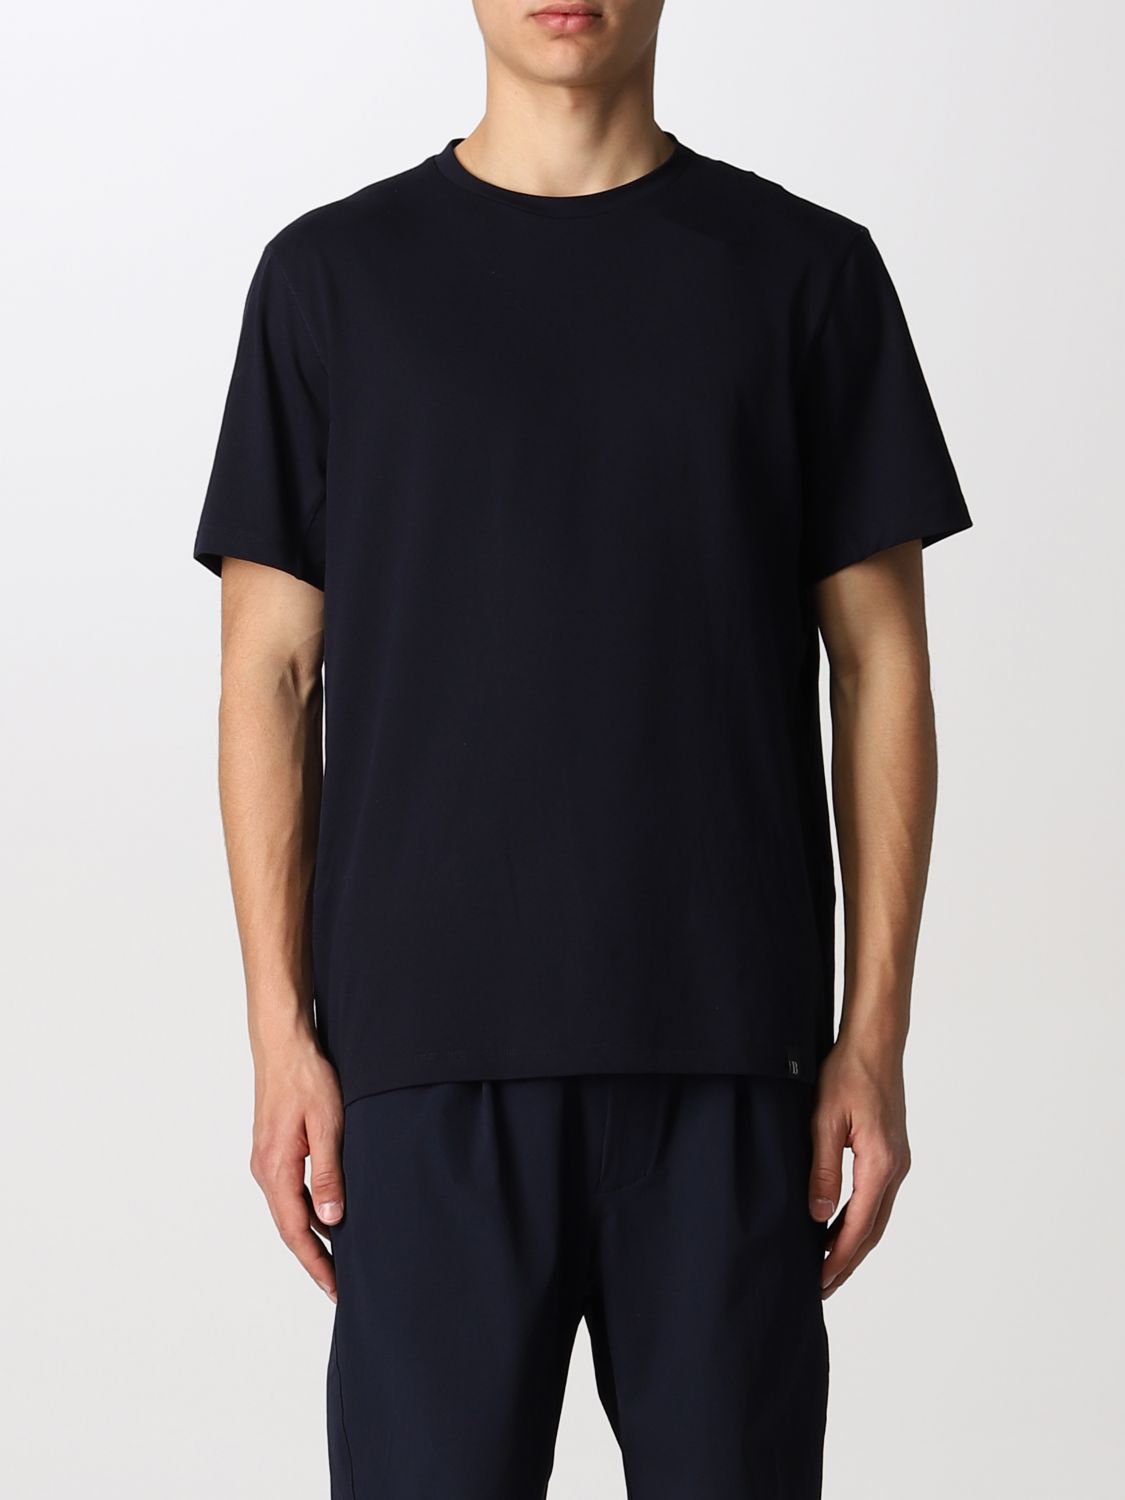 BOGGI MILANO: T-shirt in eco-sustainable performance pique - Navy ...